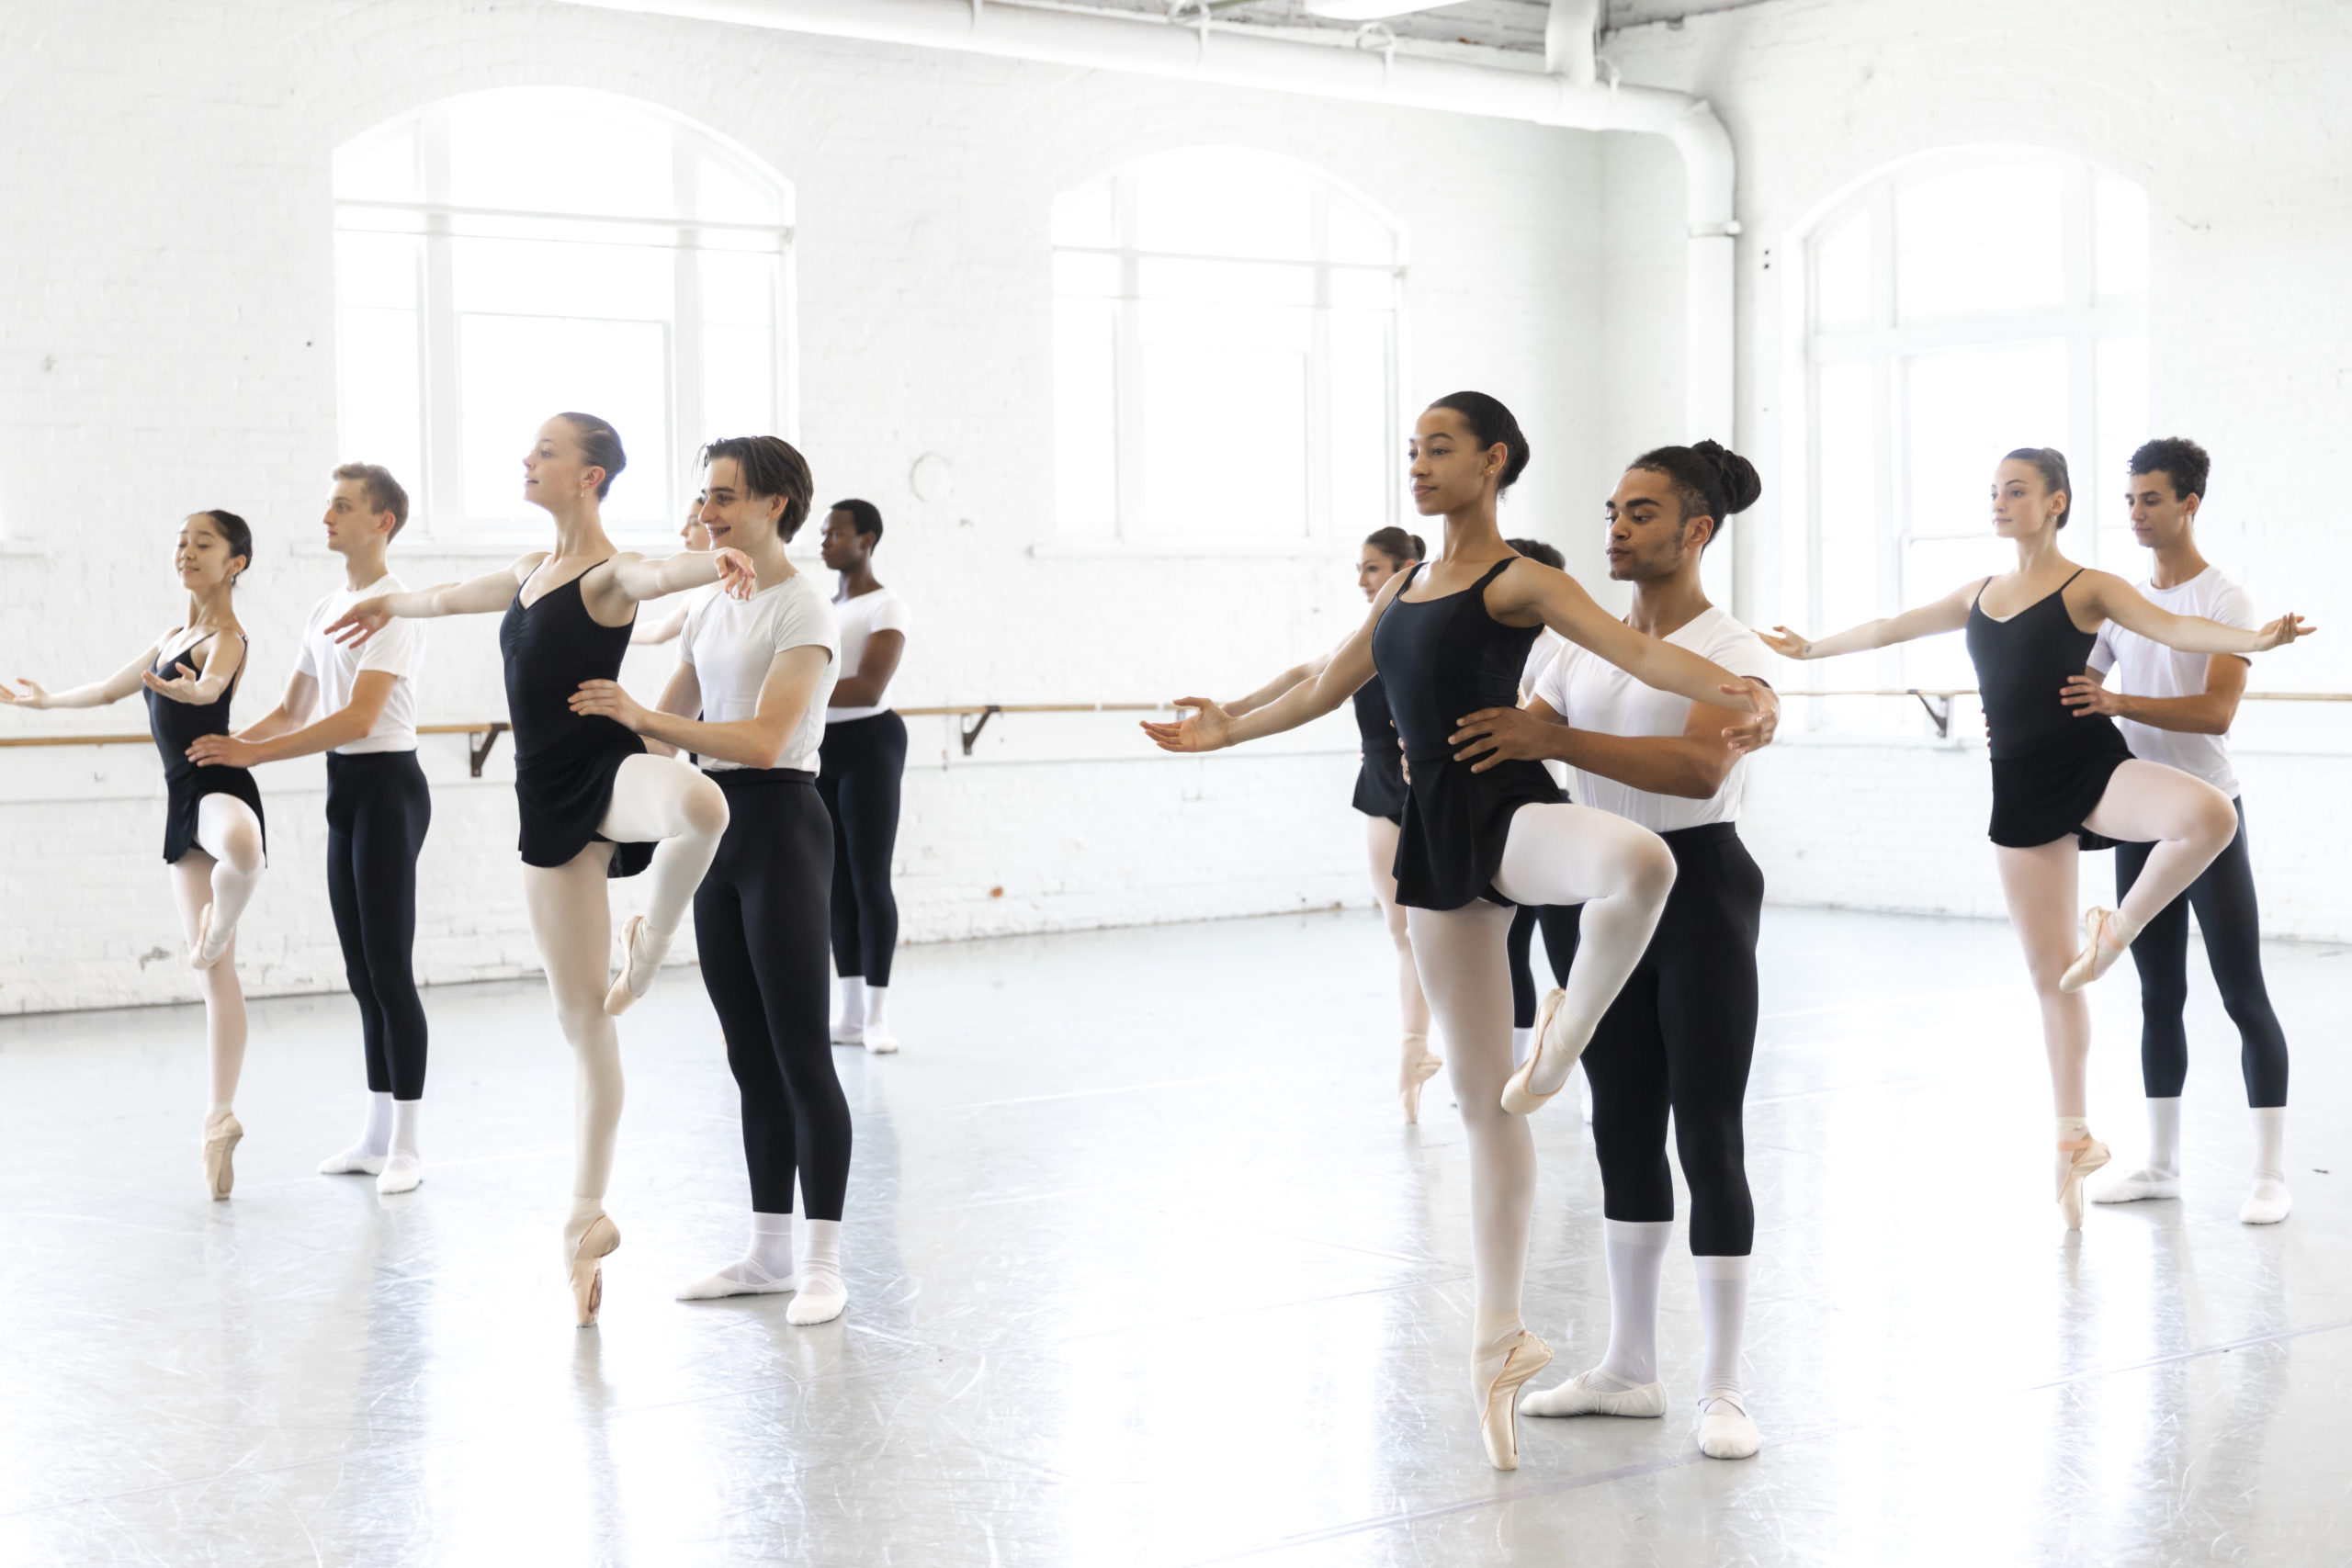 Six teen ballet couples in a studio. The women balance in passé relevé as the men support them, holding their waists from behind.